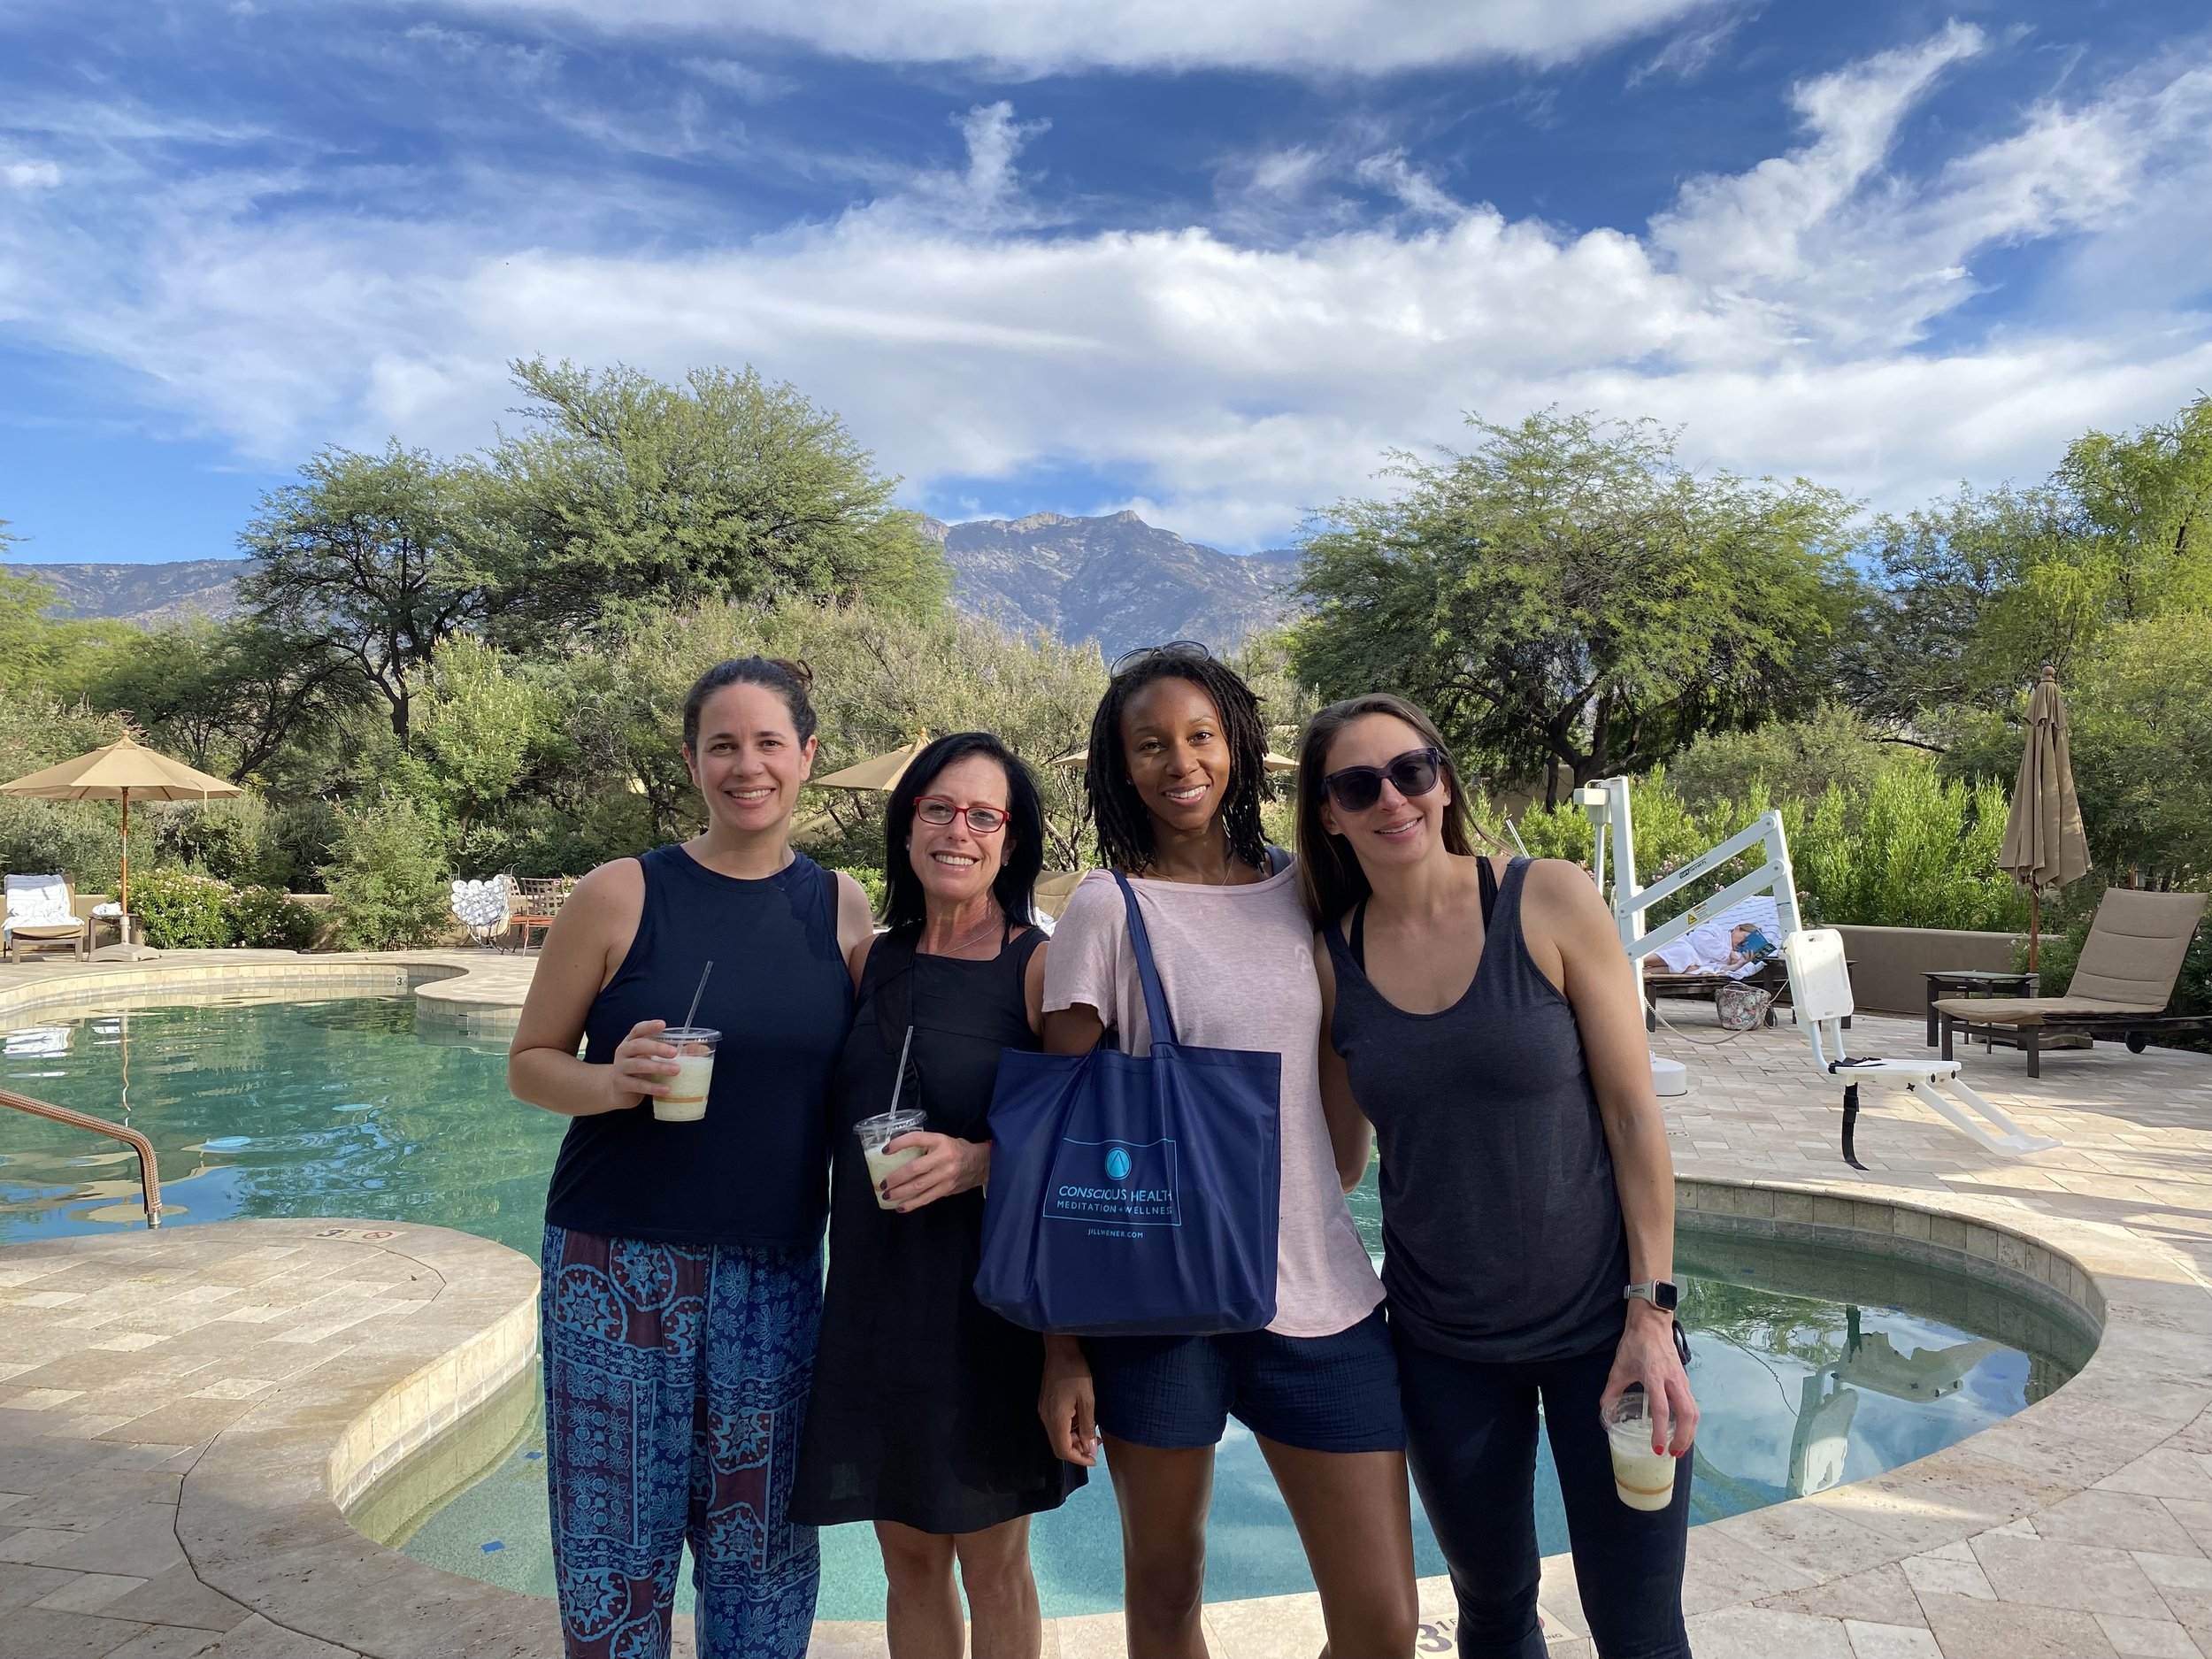 Dr. Jill Wener poses with retreat attendees who are enjoying refreshing drinks, standing by the pool at the retreat center.